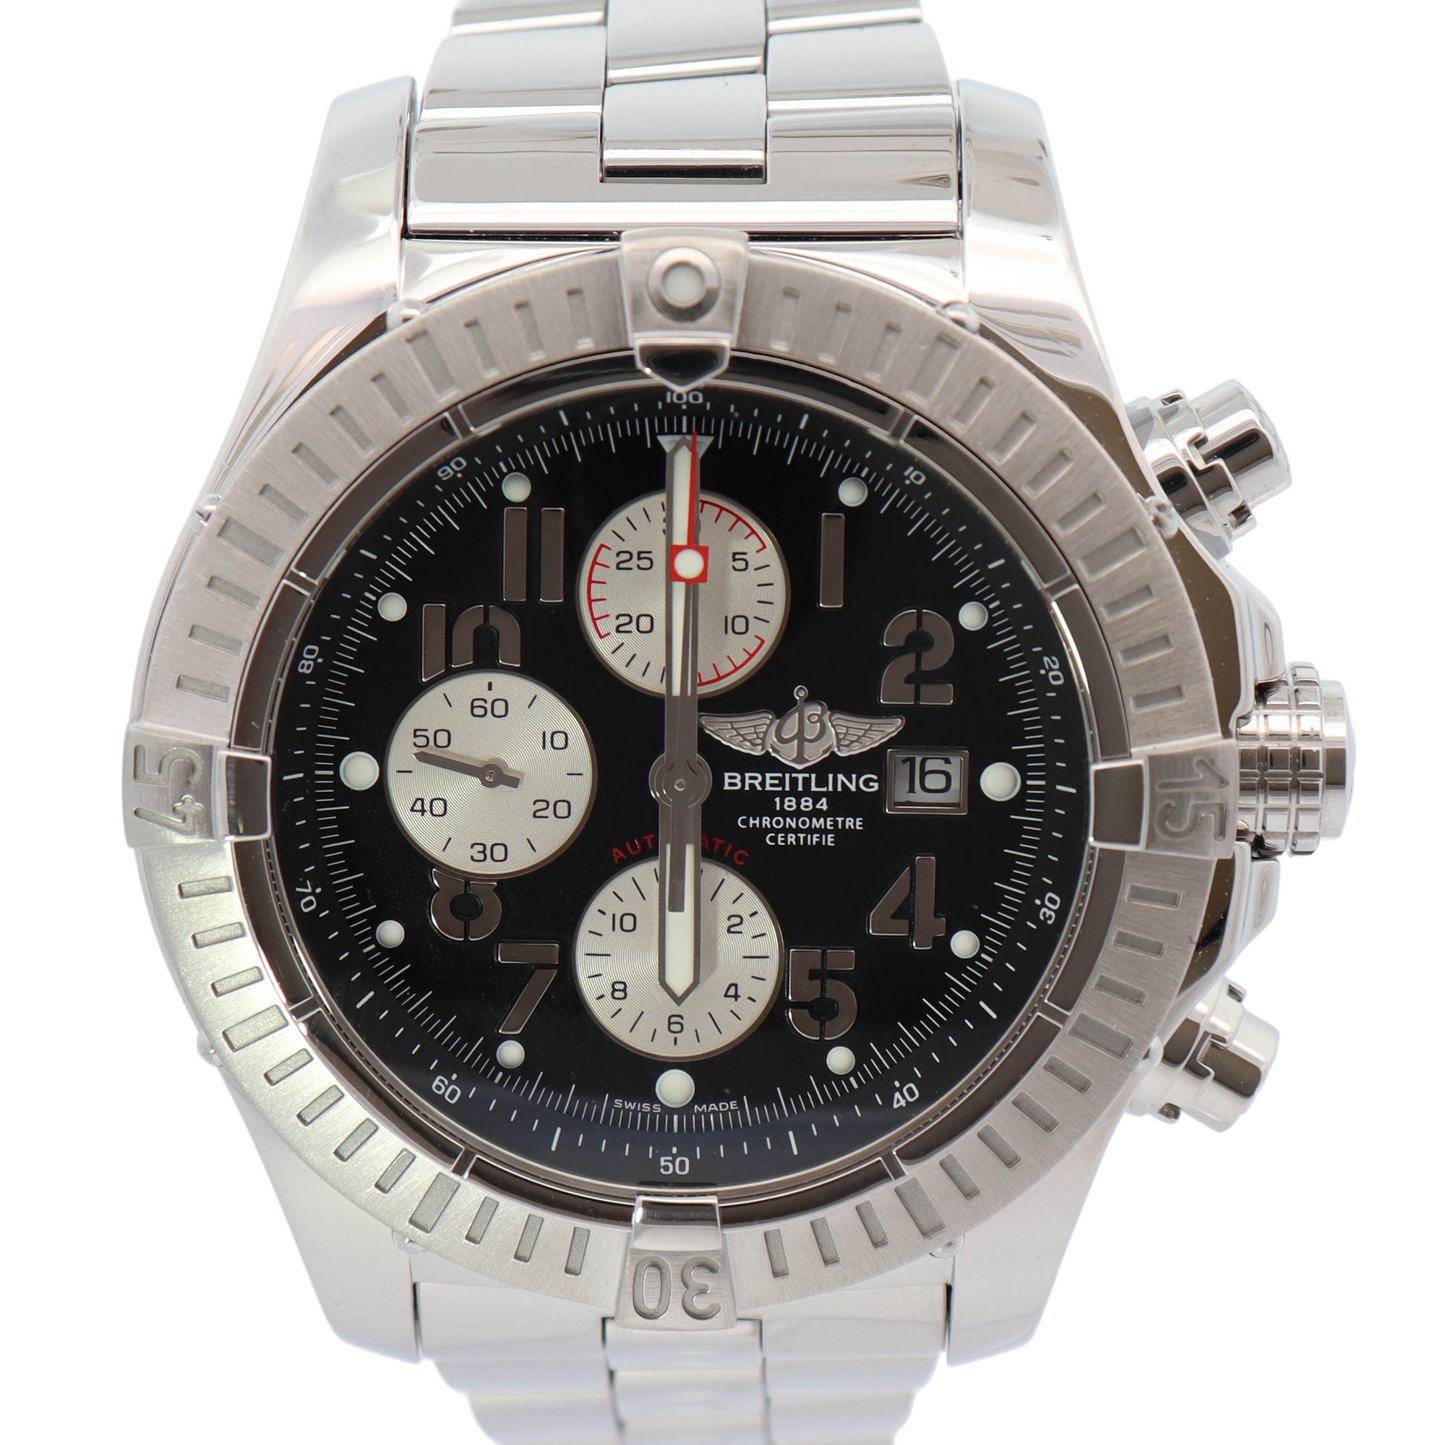 Breitling Super Avenger Stainless Steel 48mm Black Chronograph Dial Watch Reference#: A13370 - Happy Jewelers Fine Jewelry Lifetime Warranty